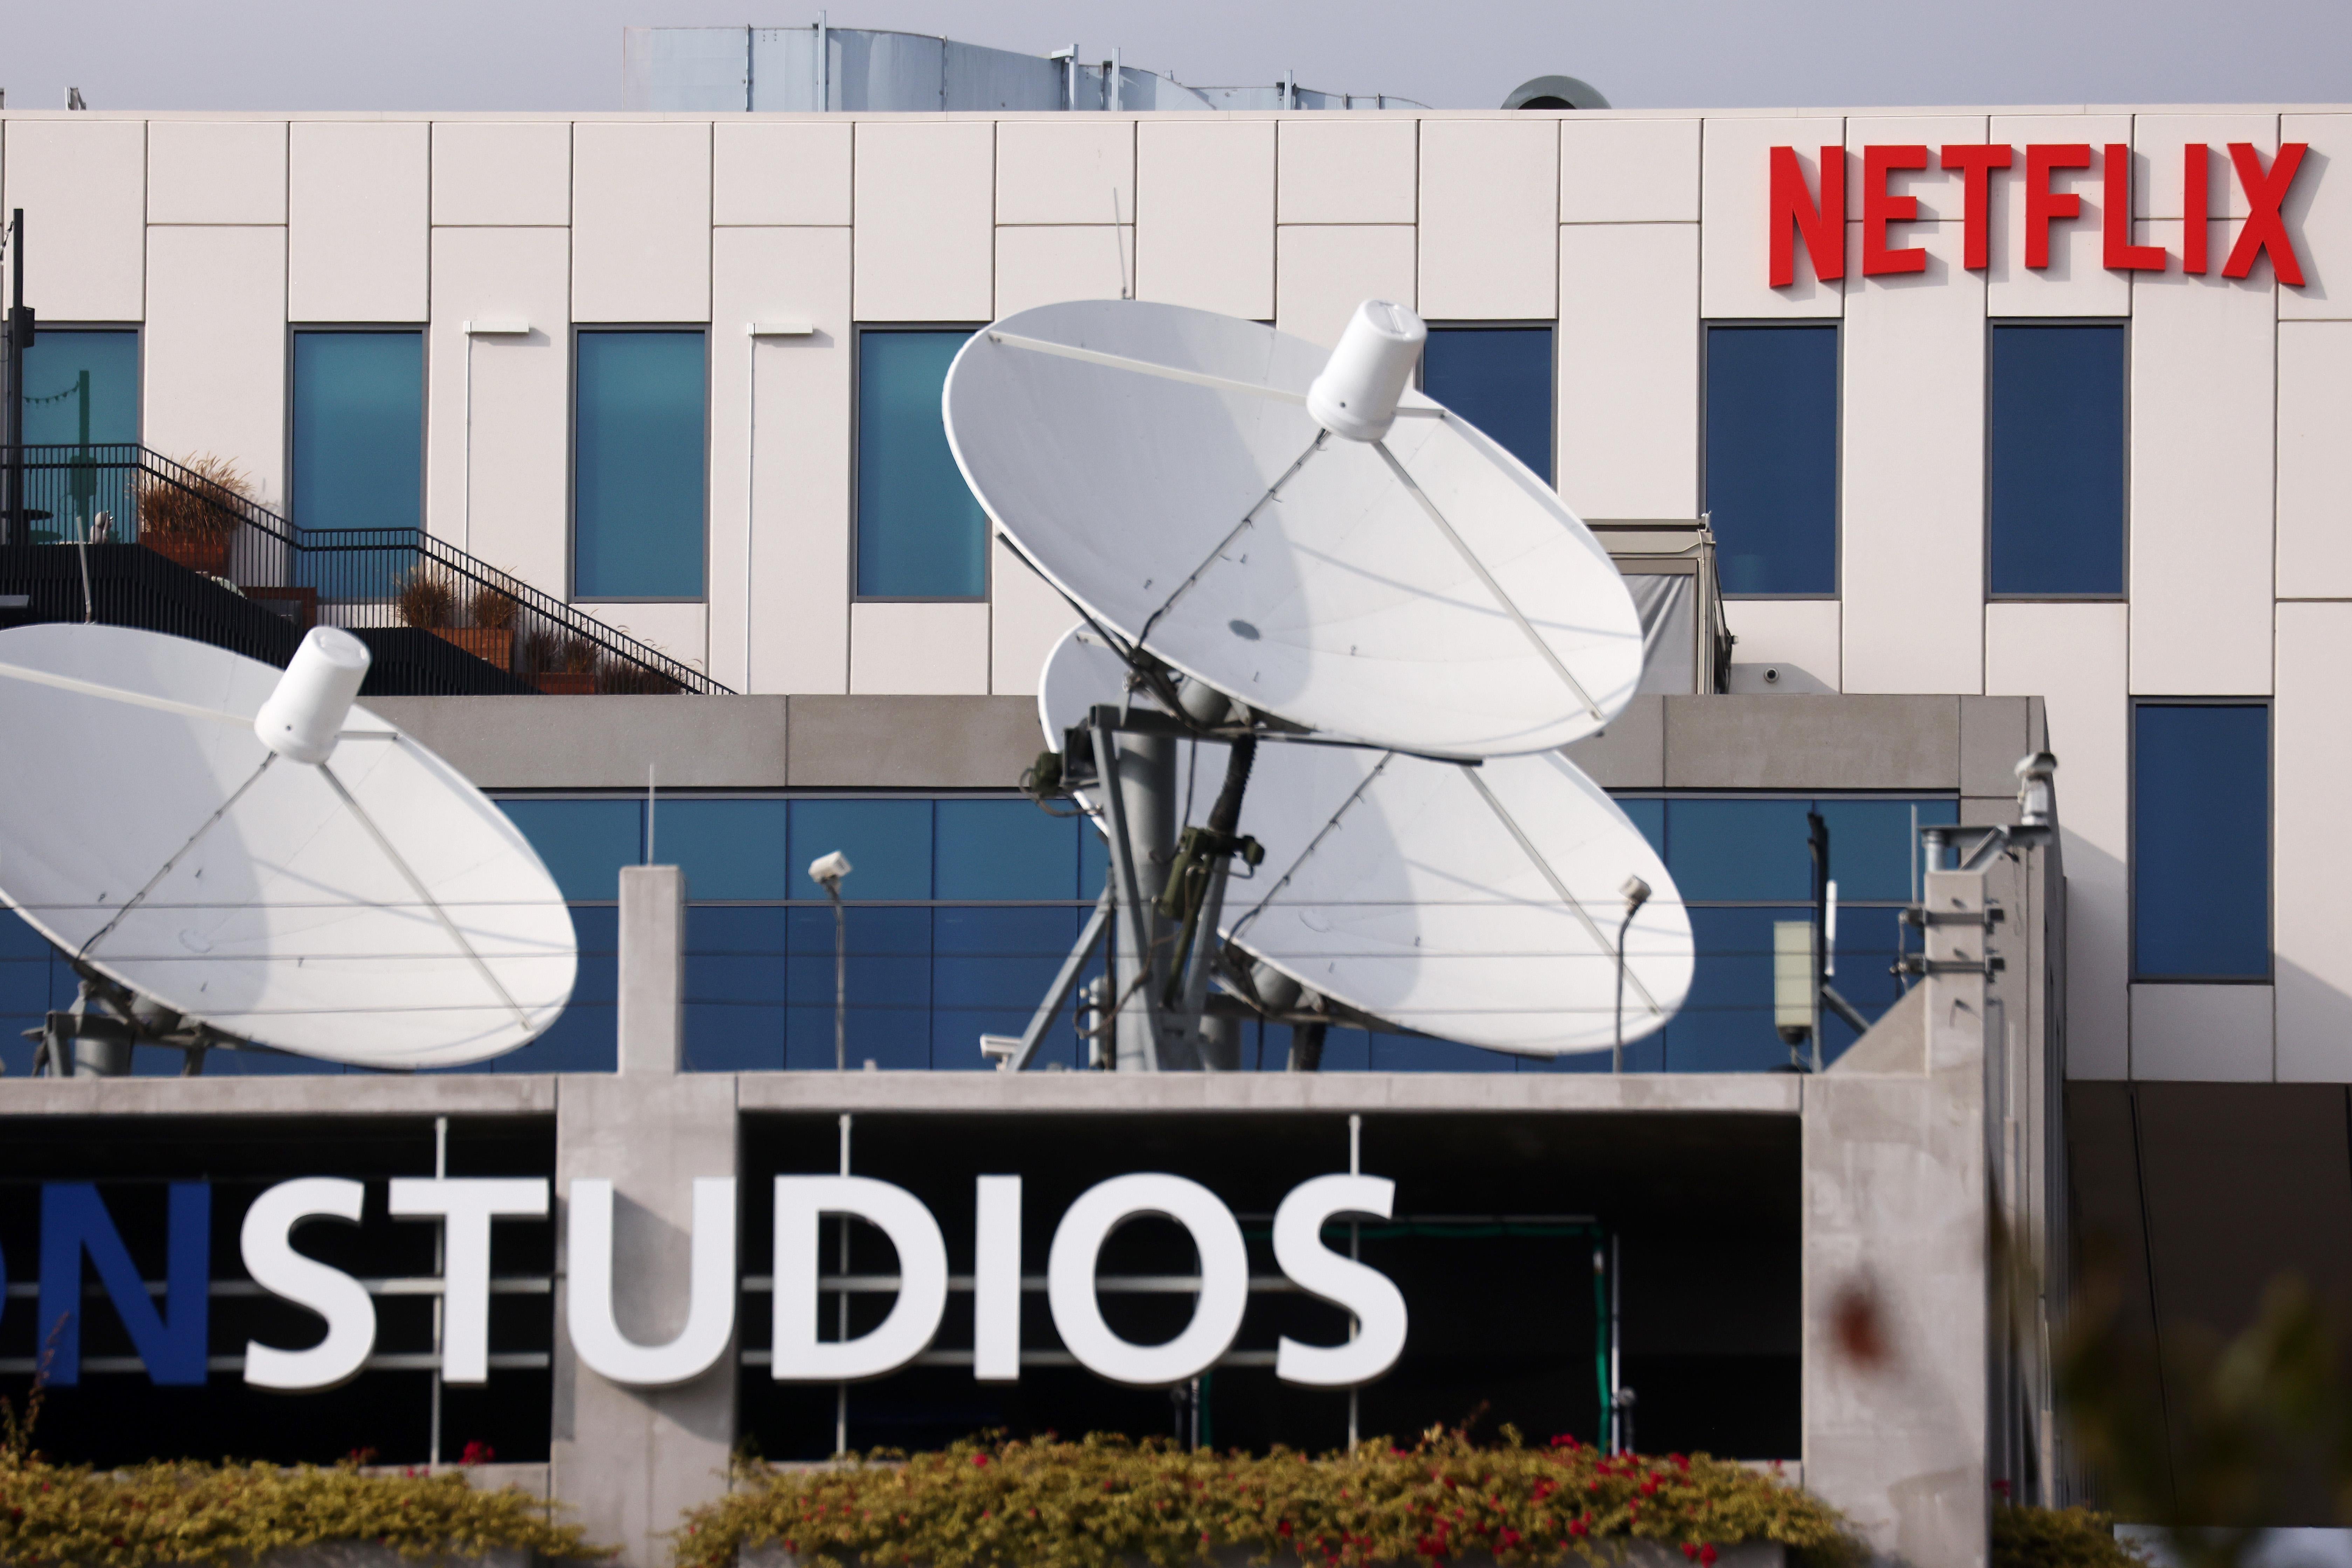 Exterior shot of a building with a Netflix sign in the background and a building with the word Studios on a logo and multiple satellite dishes on the roof in the foreground.